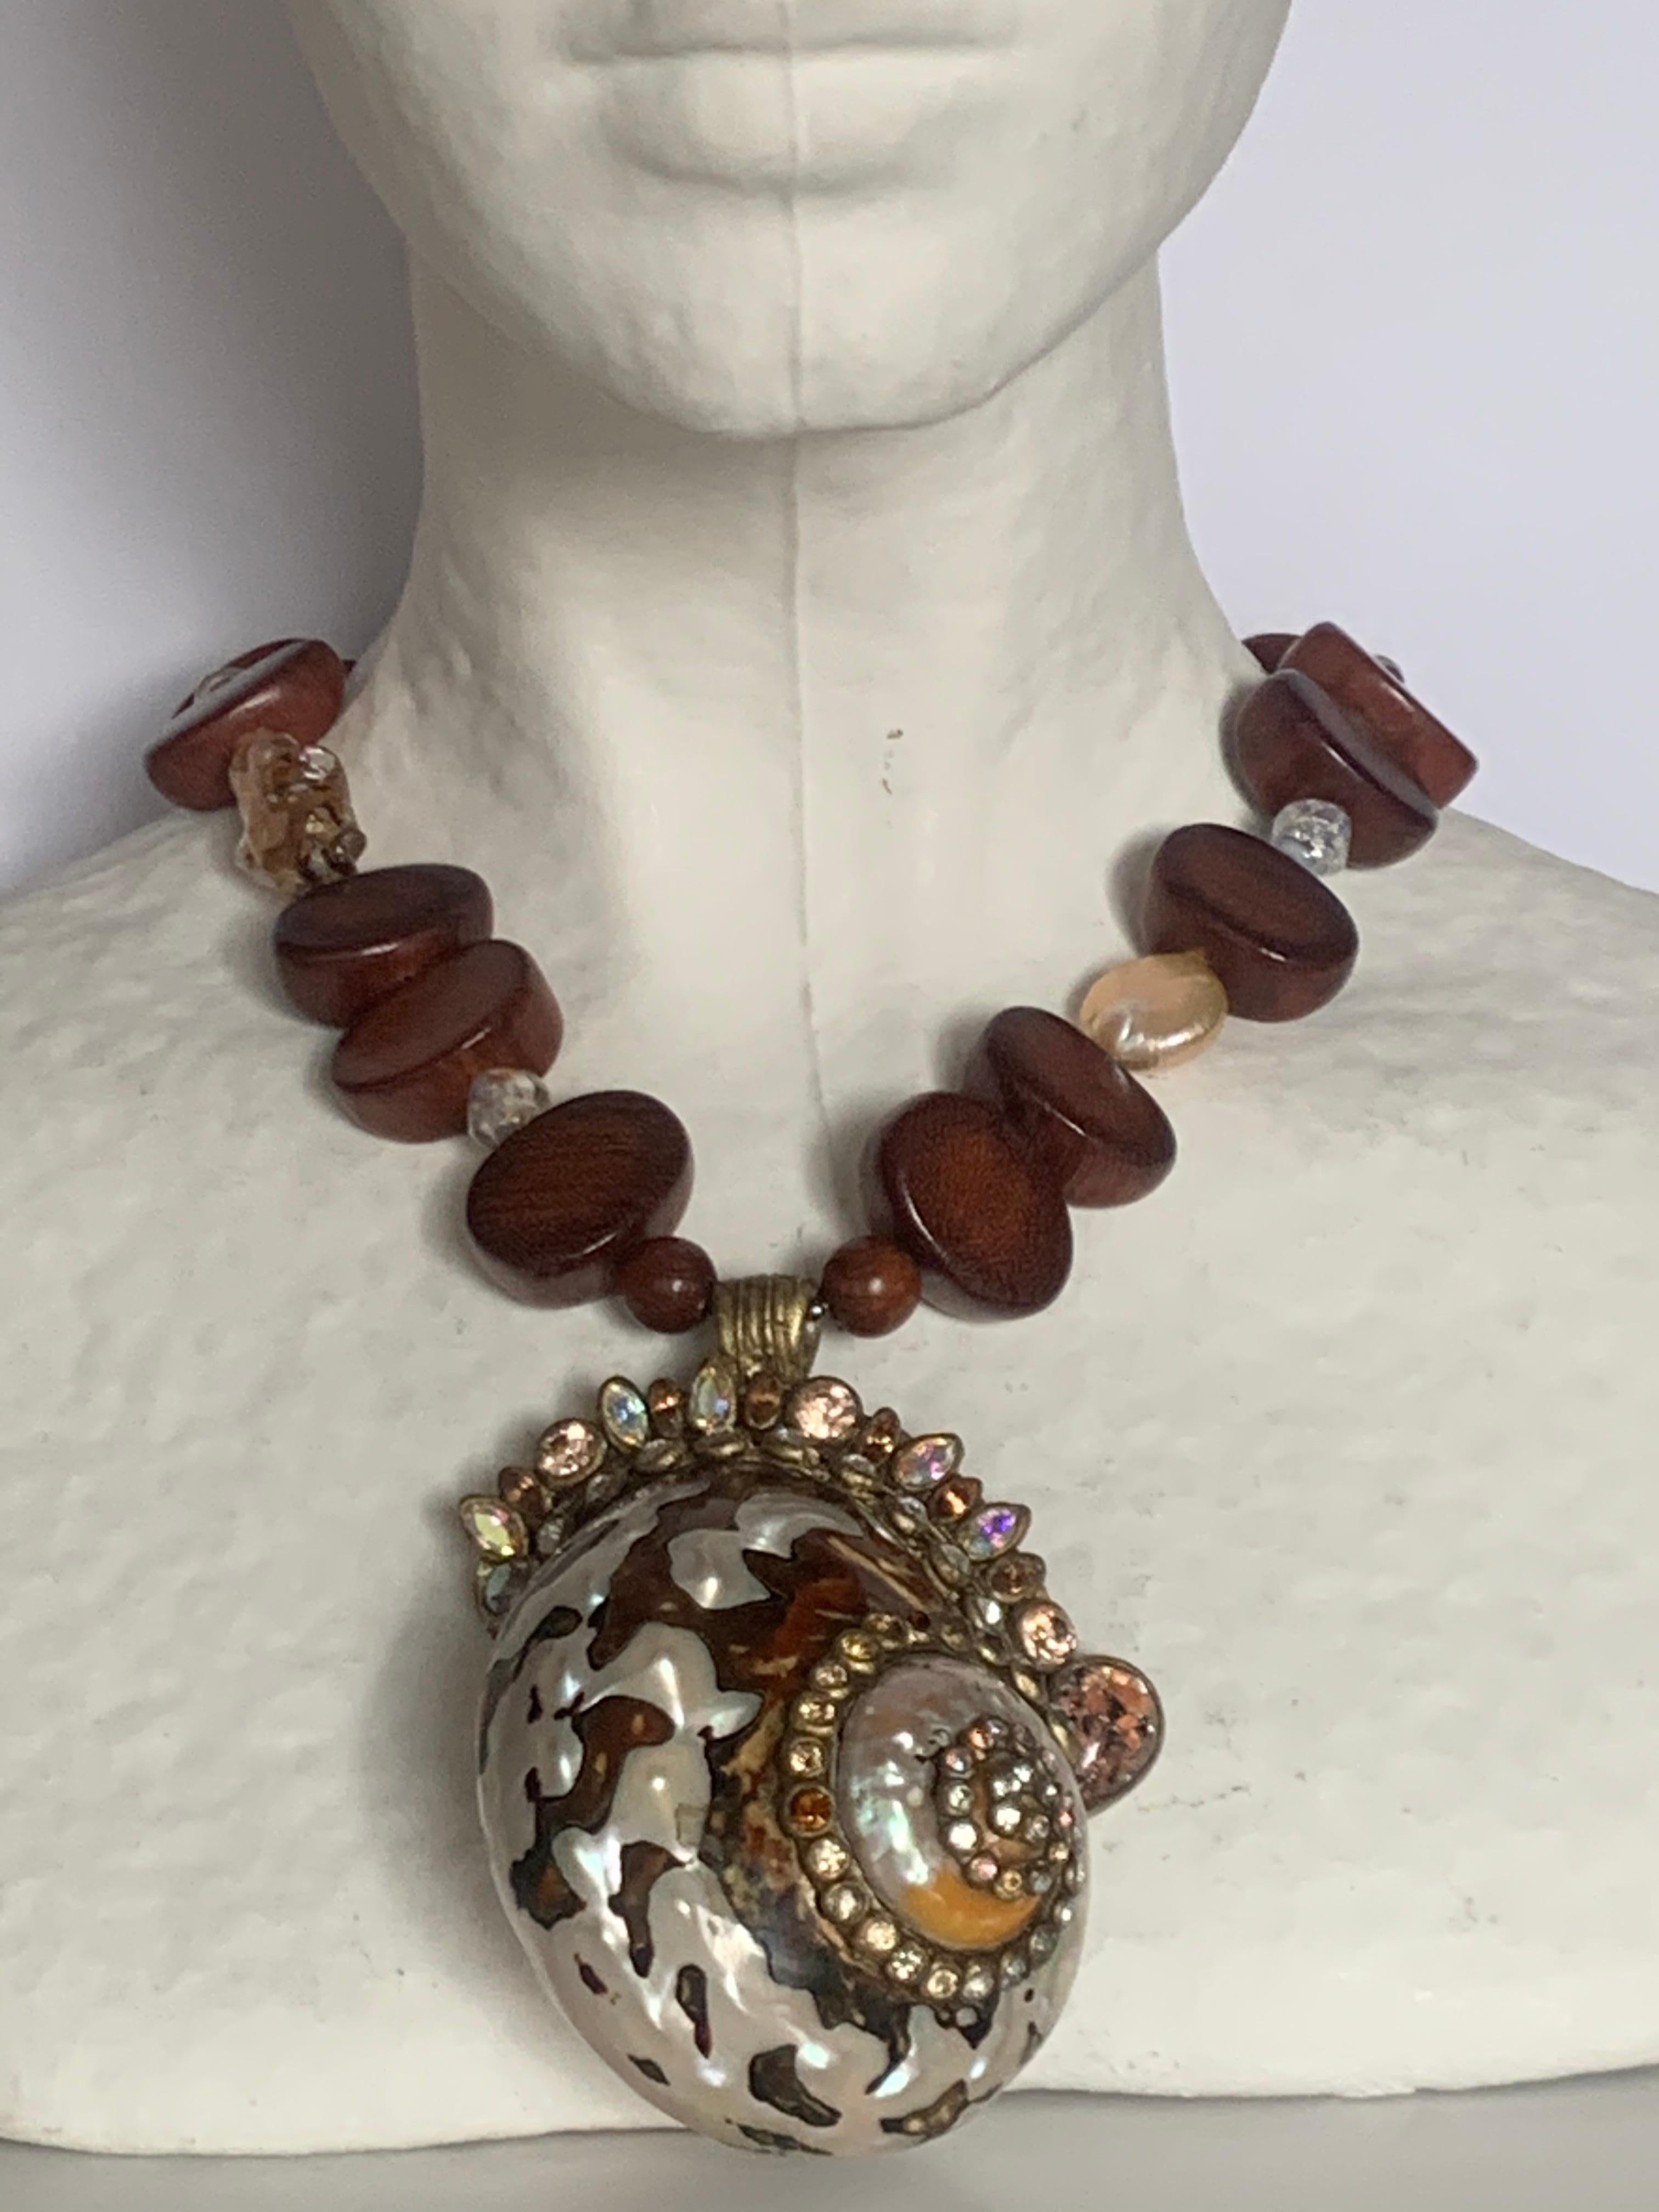 Wood bead and coin pearl necklace with extraordinary shell pendant set in paper mache with crystal elements surrounding. A true work of art. 